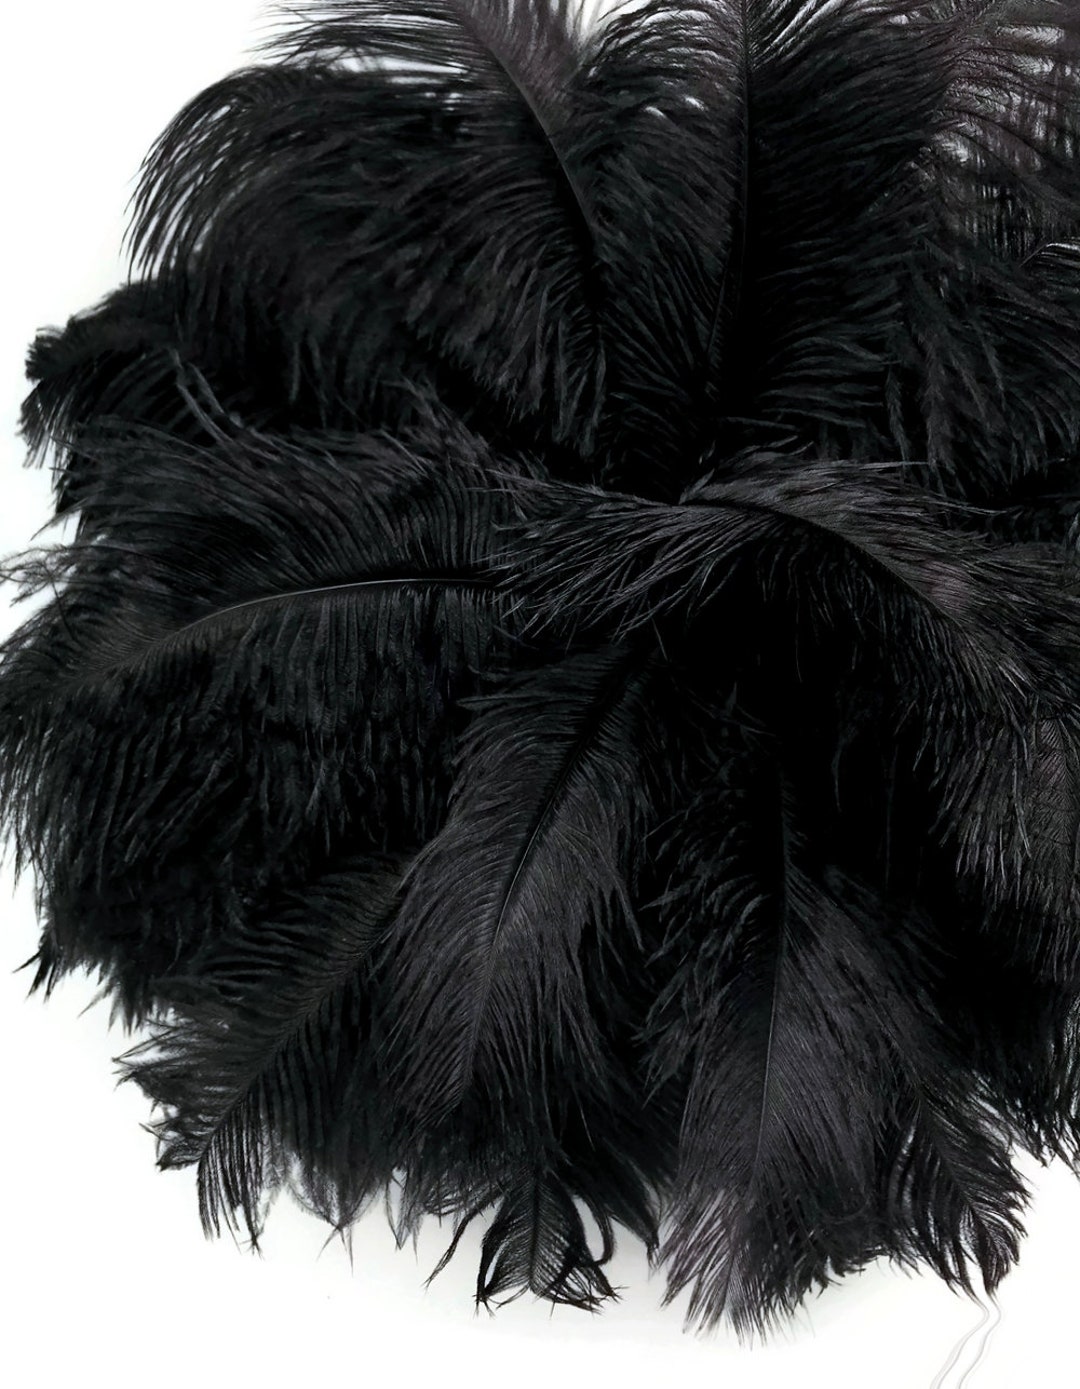 1/2 lb 14-17 Olive Ostrich Feathers